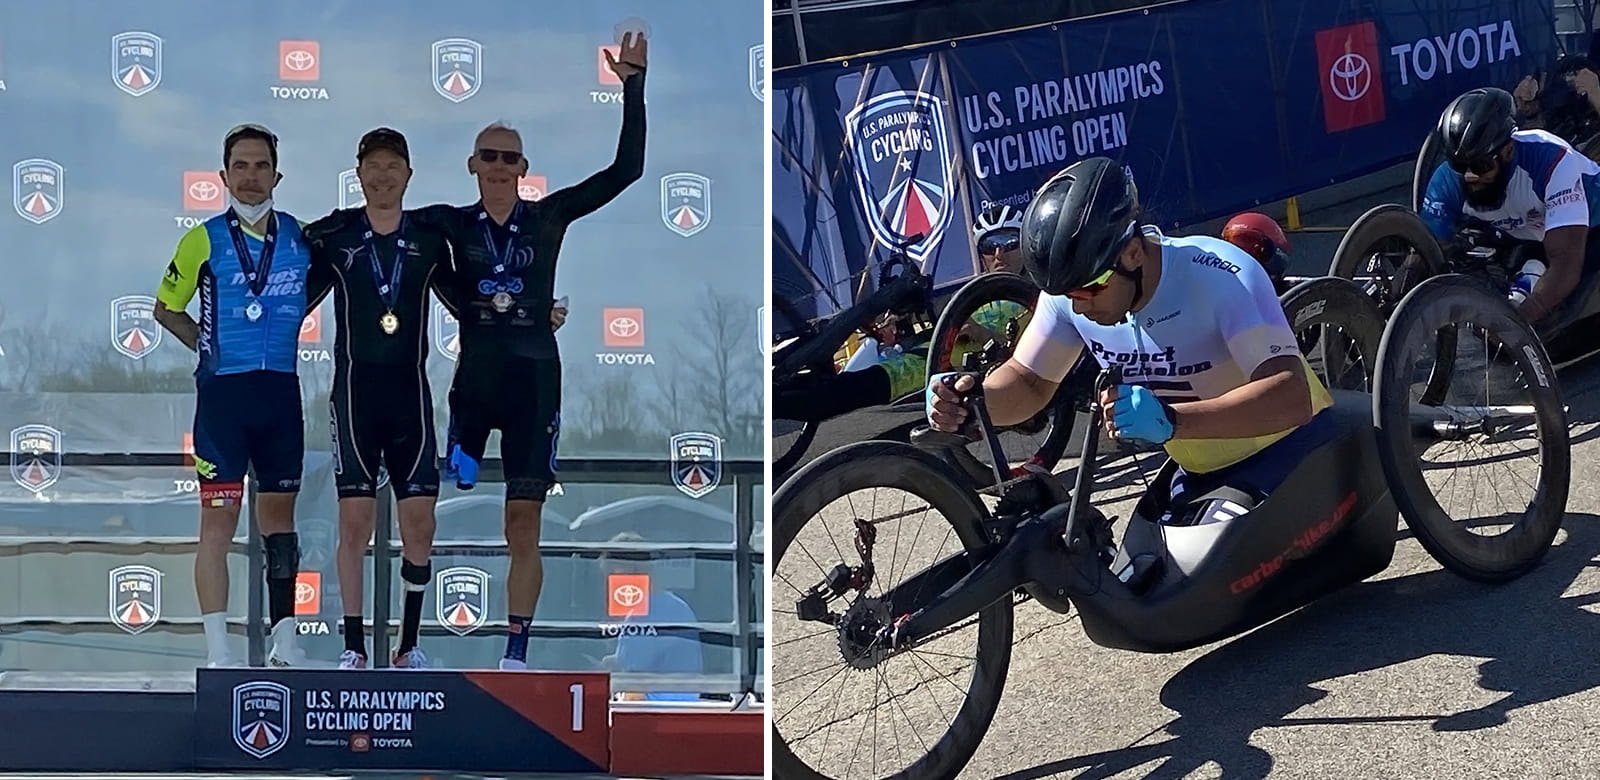 Left: the top three in the men’s cycling event stand together at the podium. Right: an athlete gets ready for the hand-cycle races.